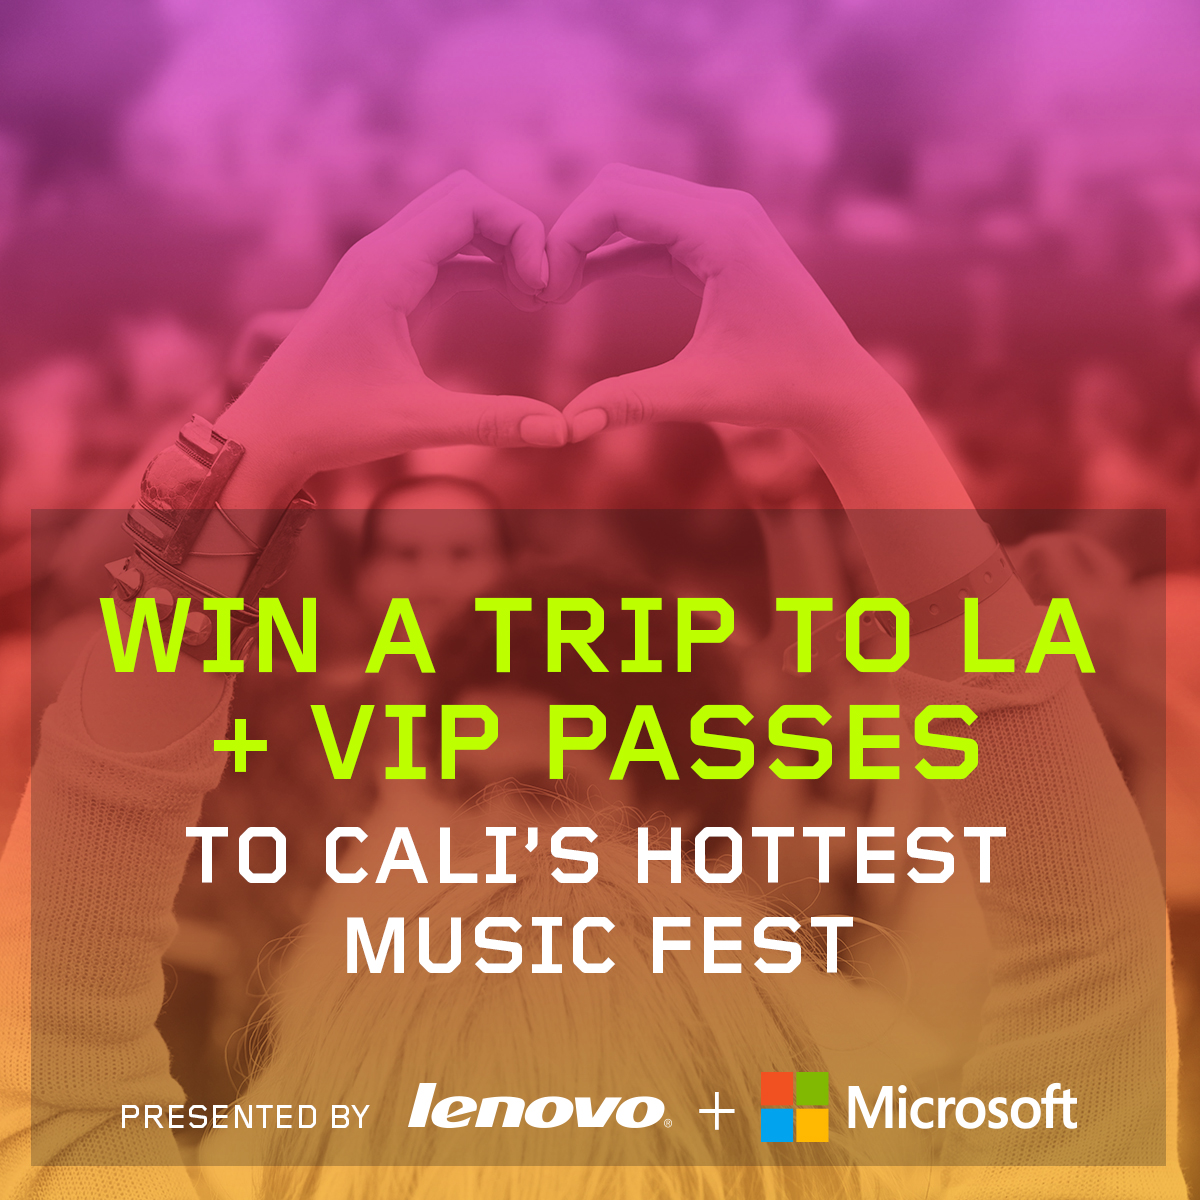 Lenovo, Microsoft, sweepstakes, concert, timbaland, #teamup, music, entertainment, concerts, concert tickets